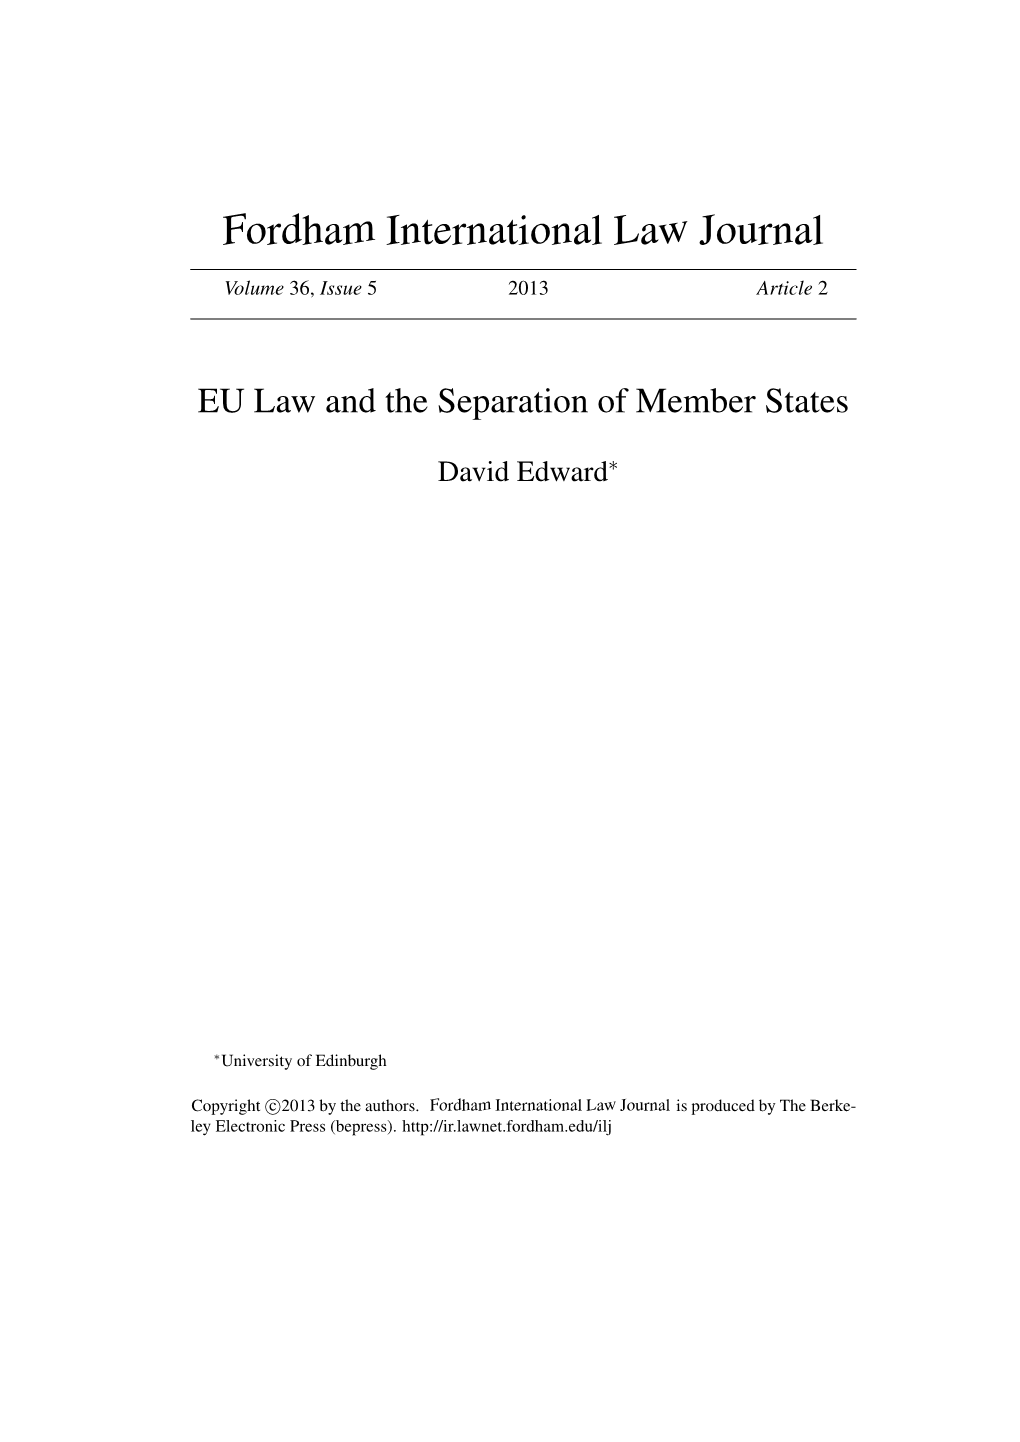 EU Law and the Separation of Member States